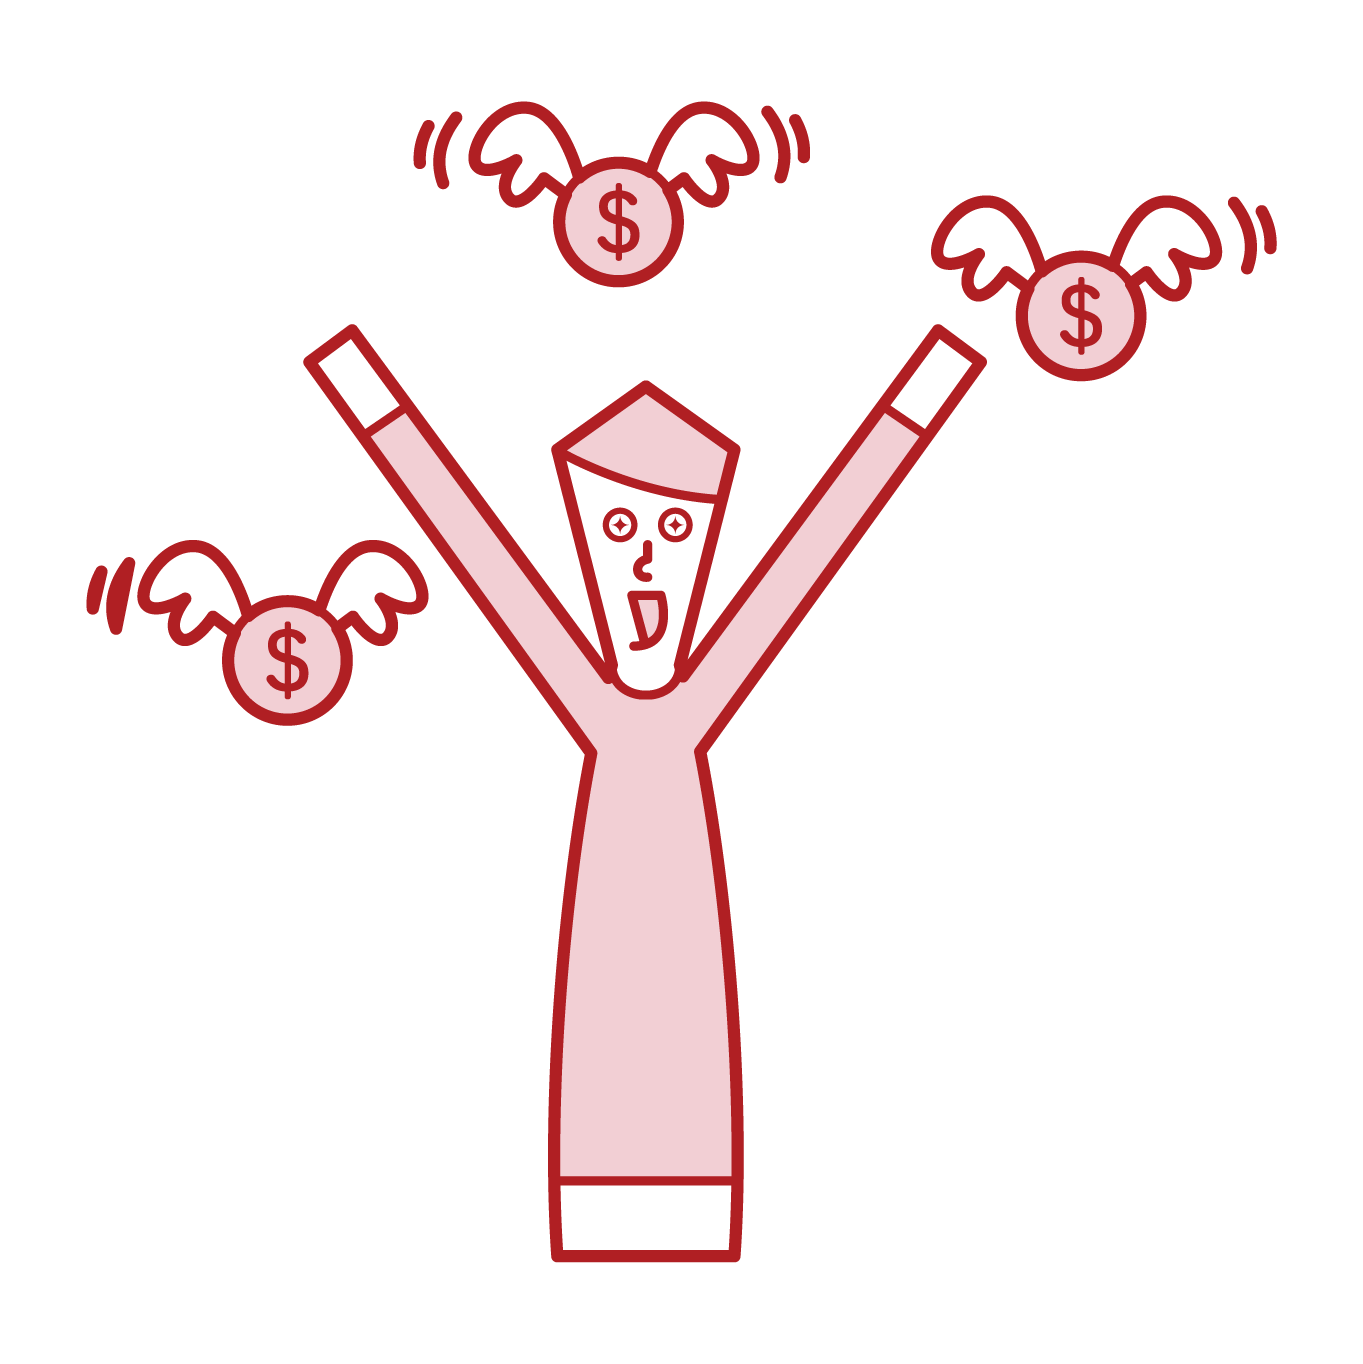 Illustration of a man who is happy to earn a special income